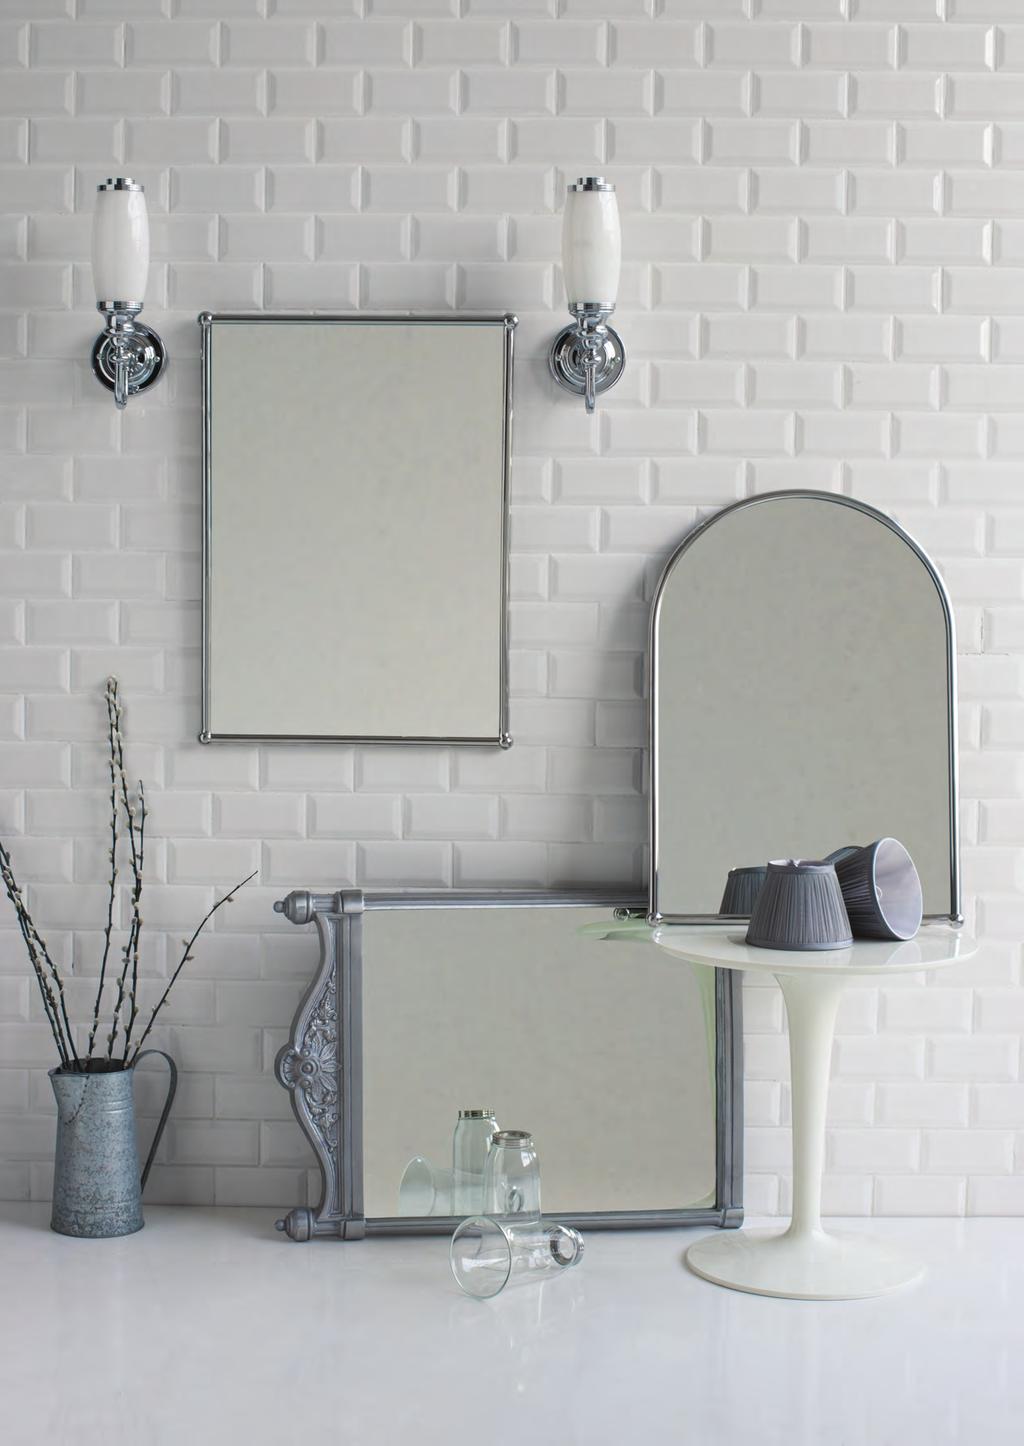 MIRRORS & LIGHTS Mirrors & Lights The perfect addition to your bathroom, Burlington